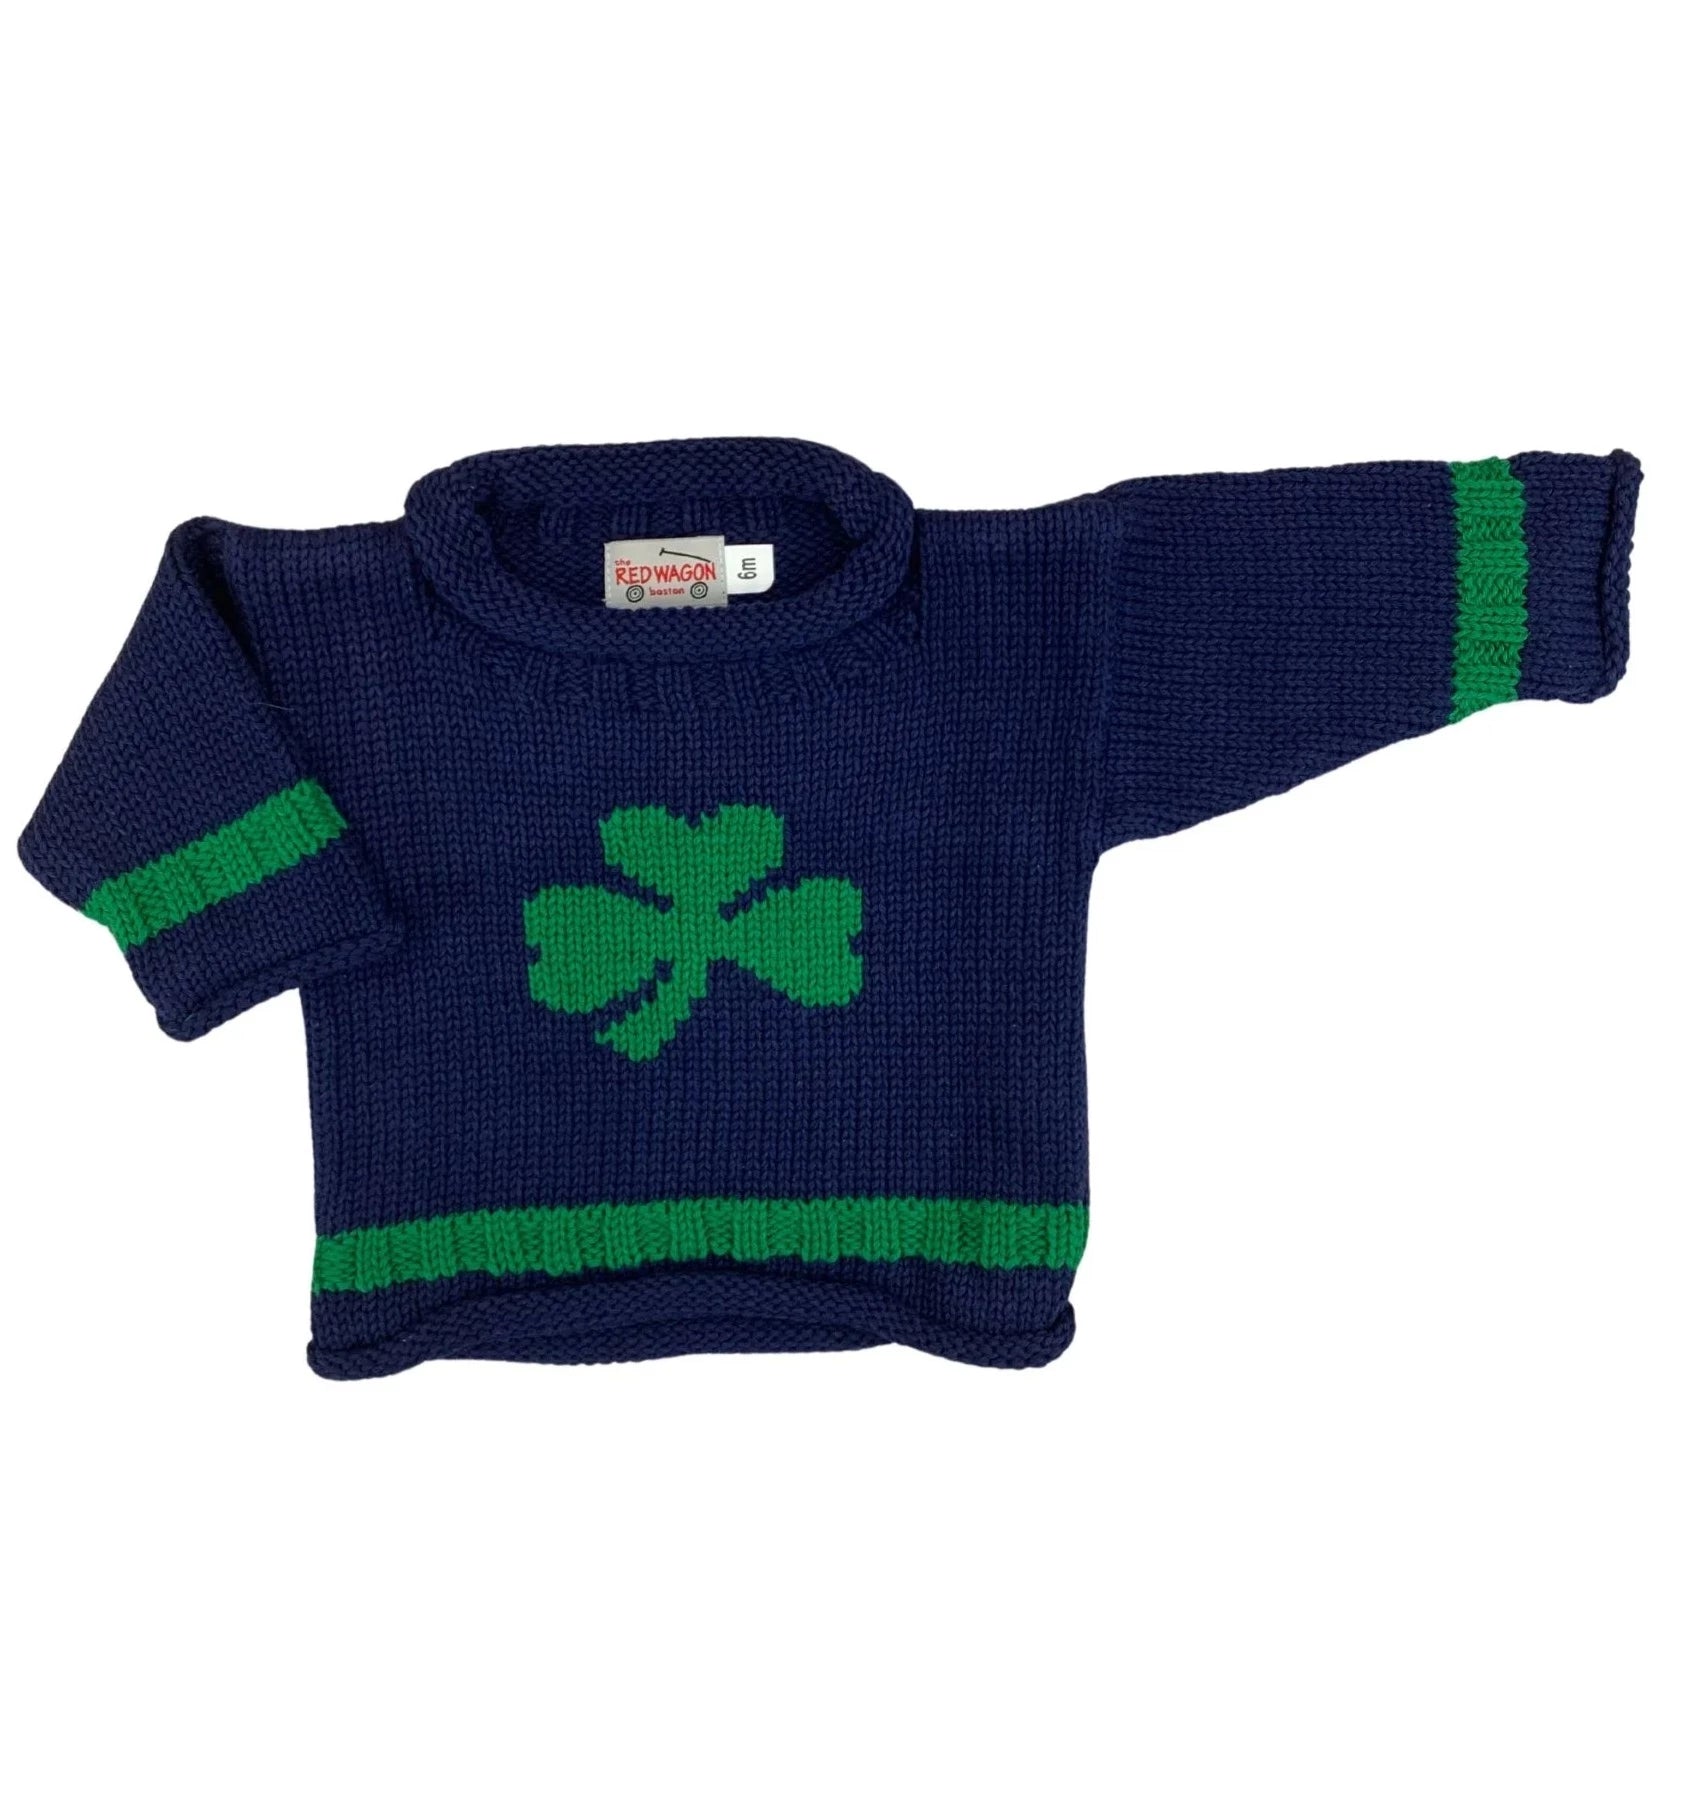 navy long sleeve sweater with green stripe on bottom and one on each wrist cuff and single green shamrock in center